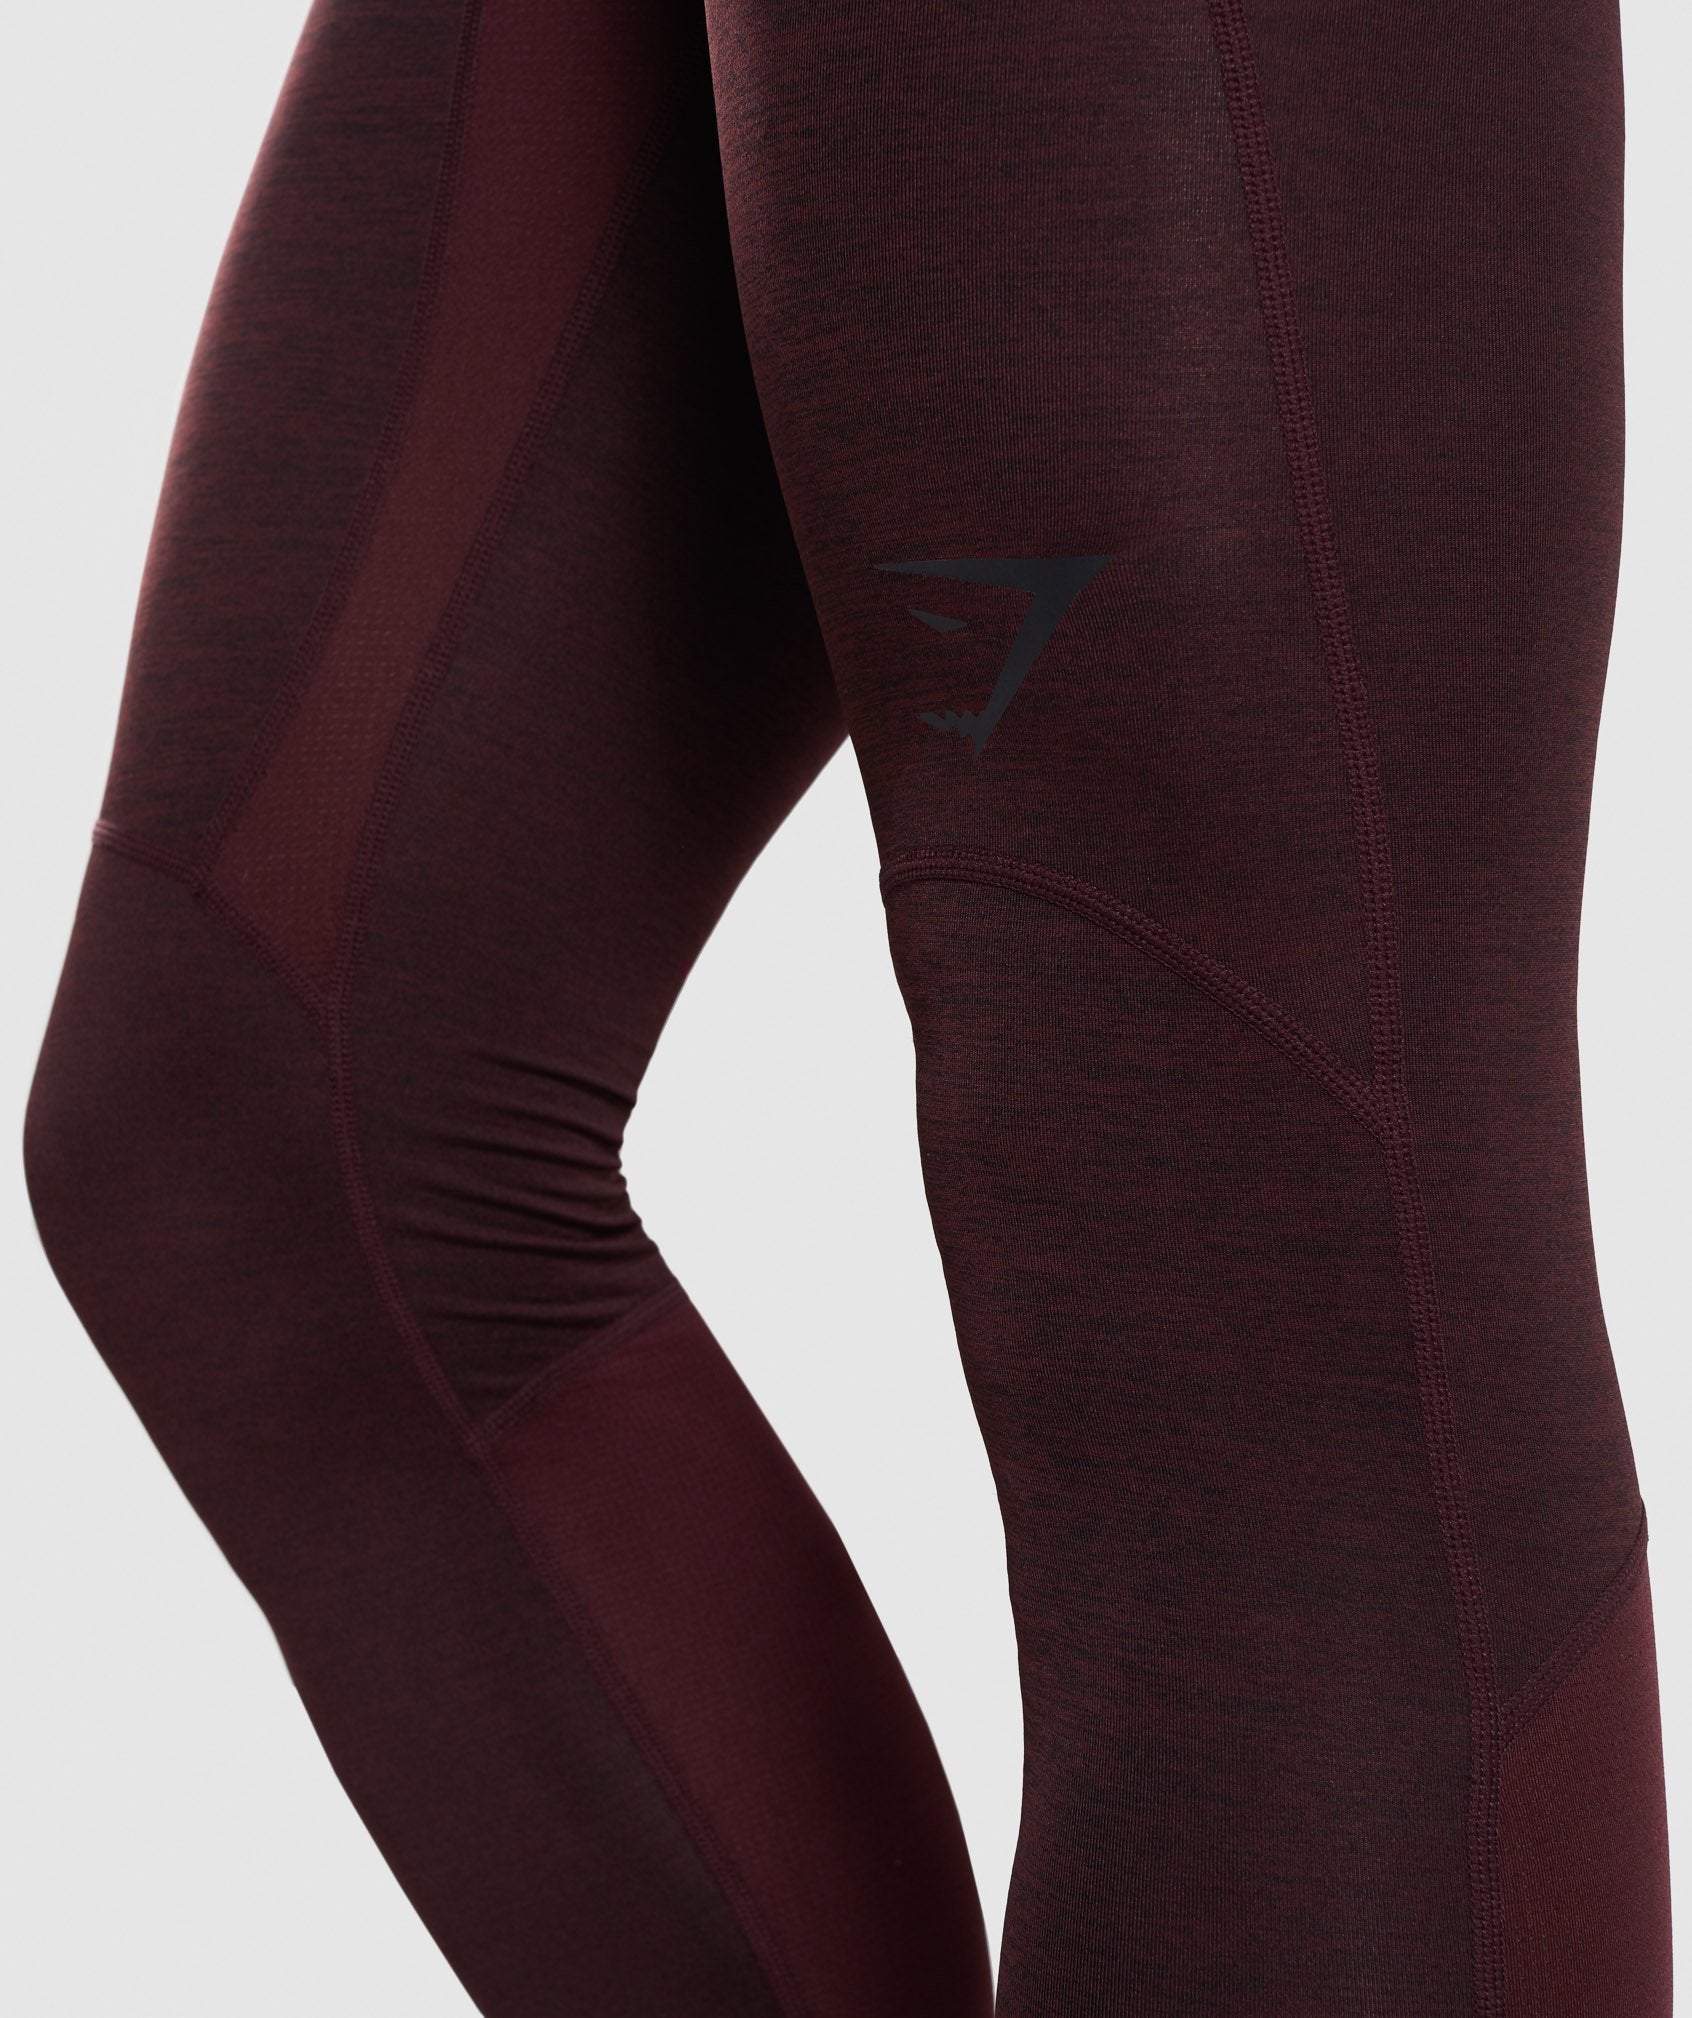 Element+ Baselayer Leggings in Ox Red Marl - view 5